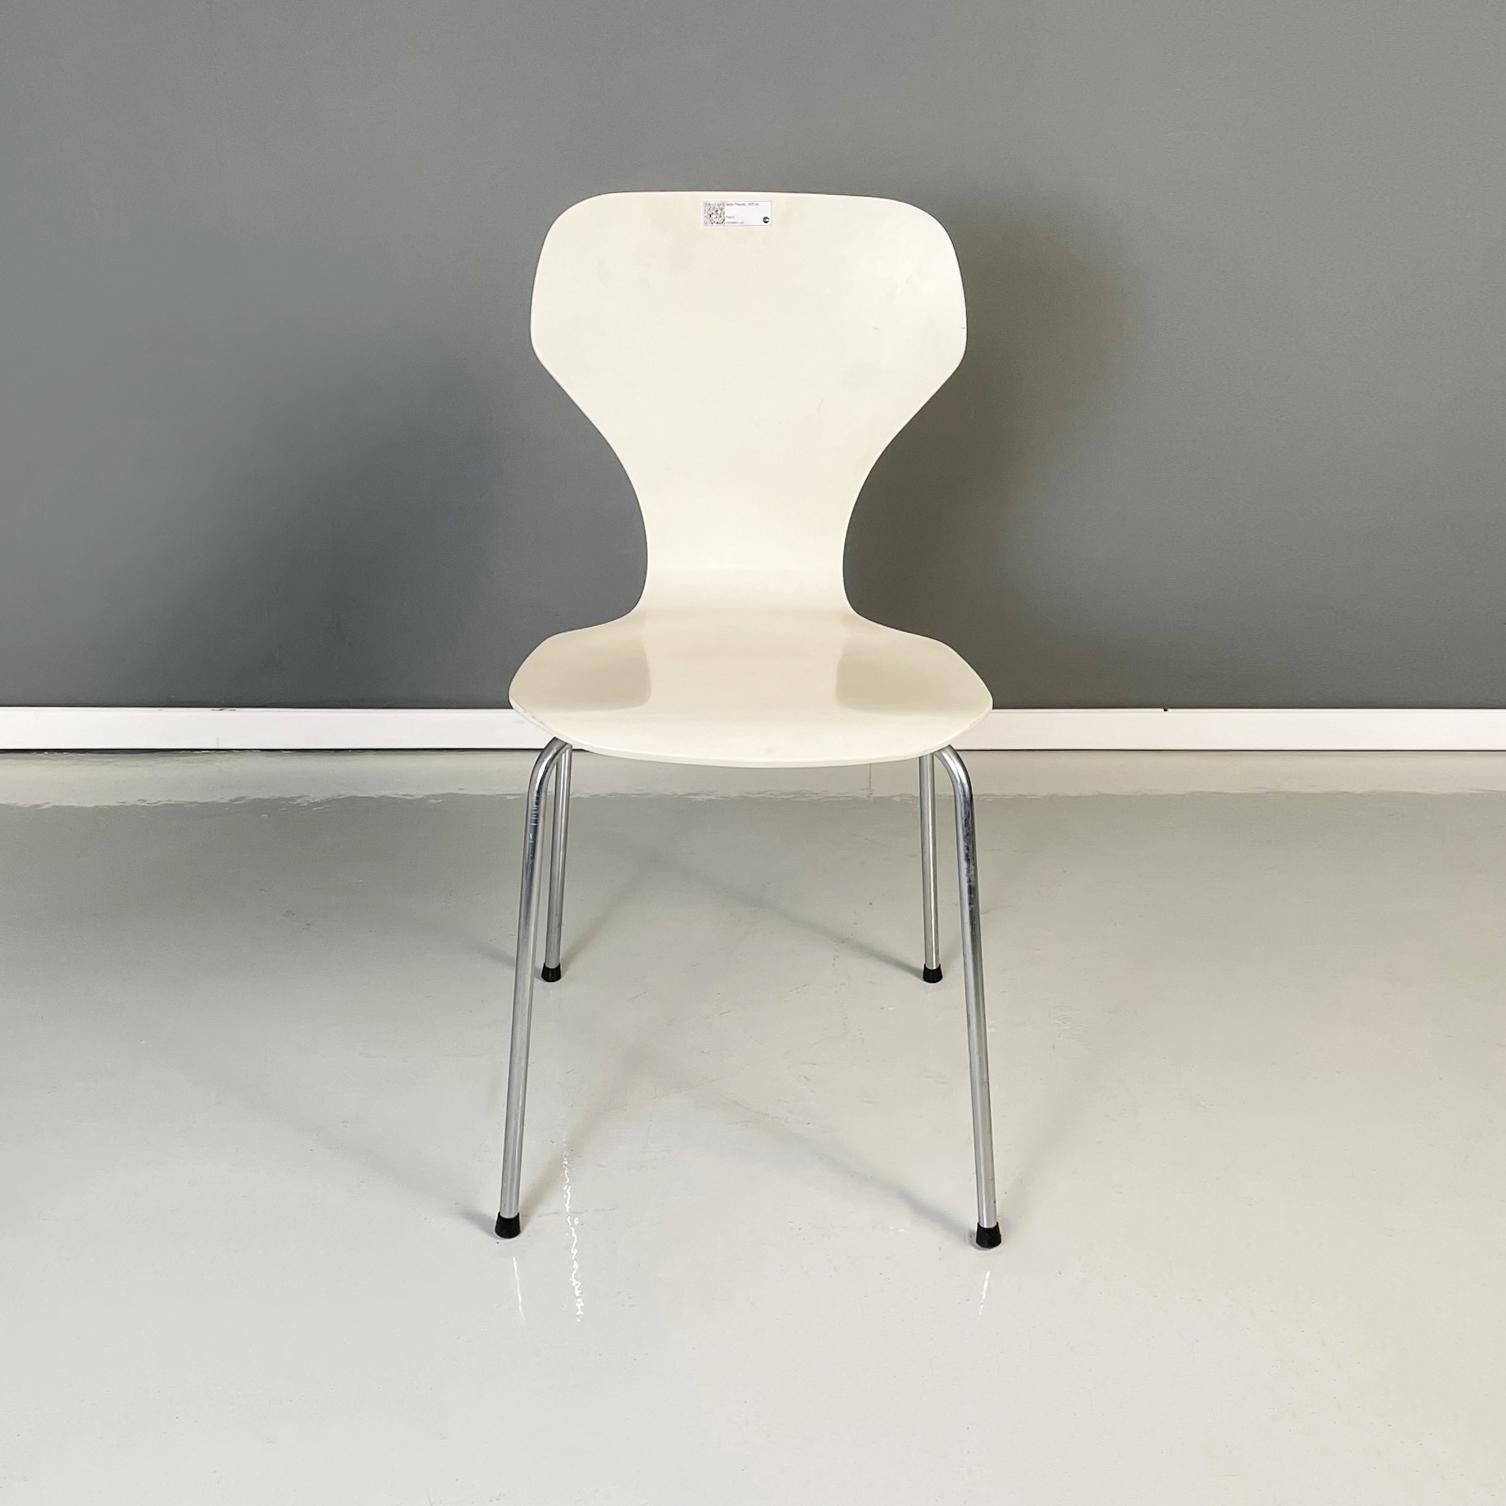 Danish modern white wooden and steel chairs by Phoenix, 1970s
Fantastic and vintage danish chair in curved wood, painted in white. The legs are in steel with black rubber feet.
It was produced by Phoenix in 1970s. Label present.
This chair is in